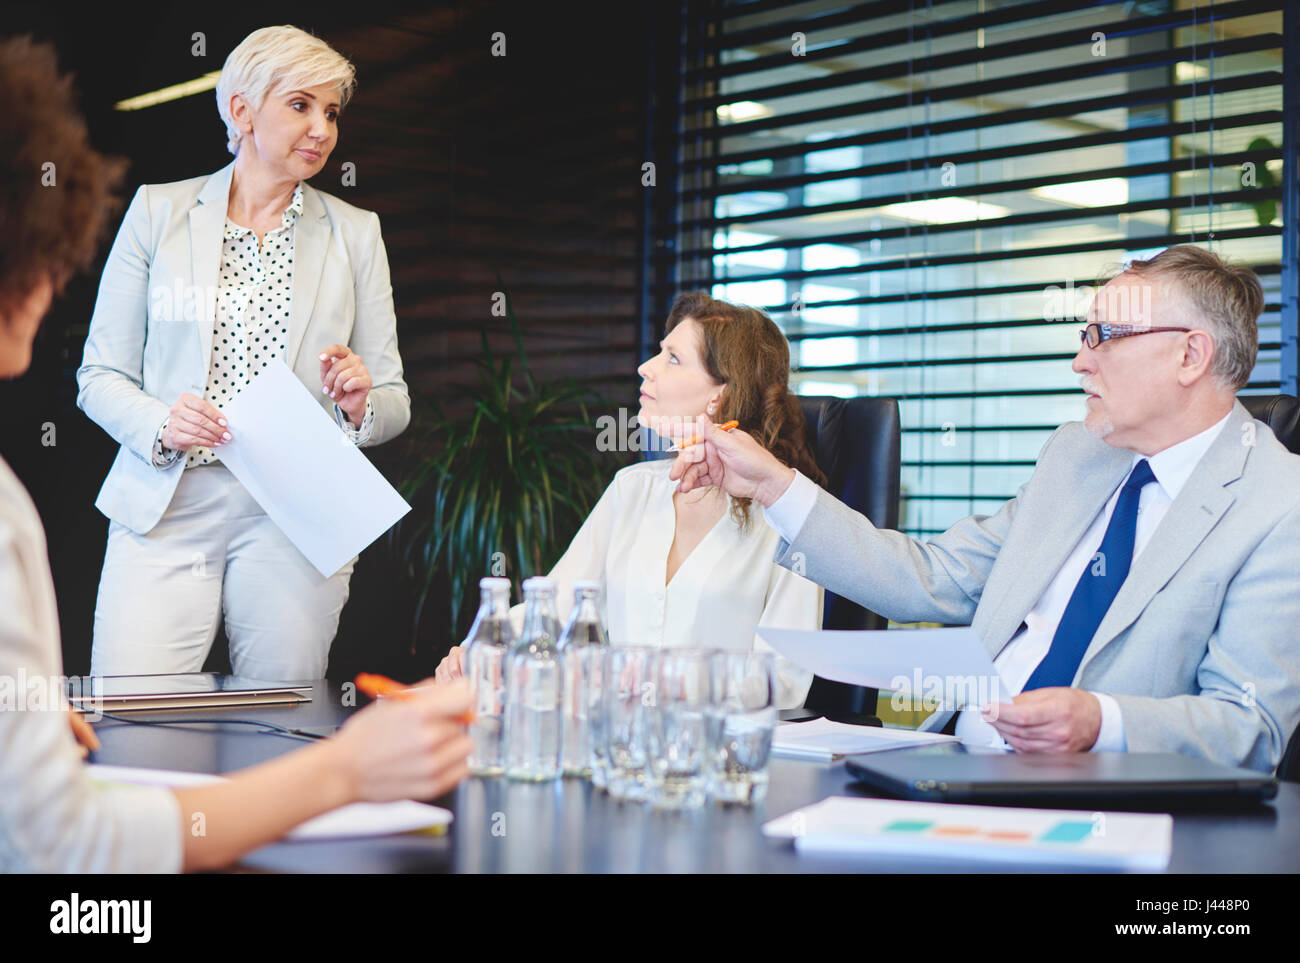 Mature woman listening to coworkers concepts Stock Photo